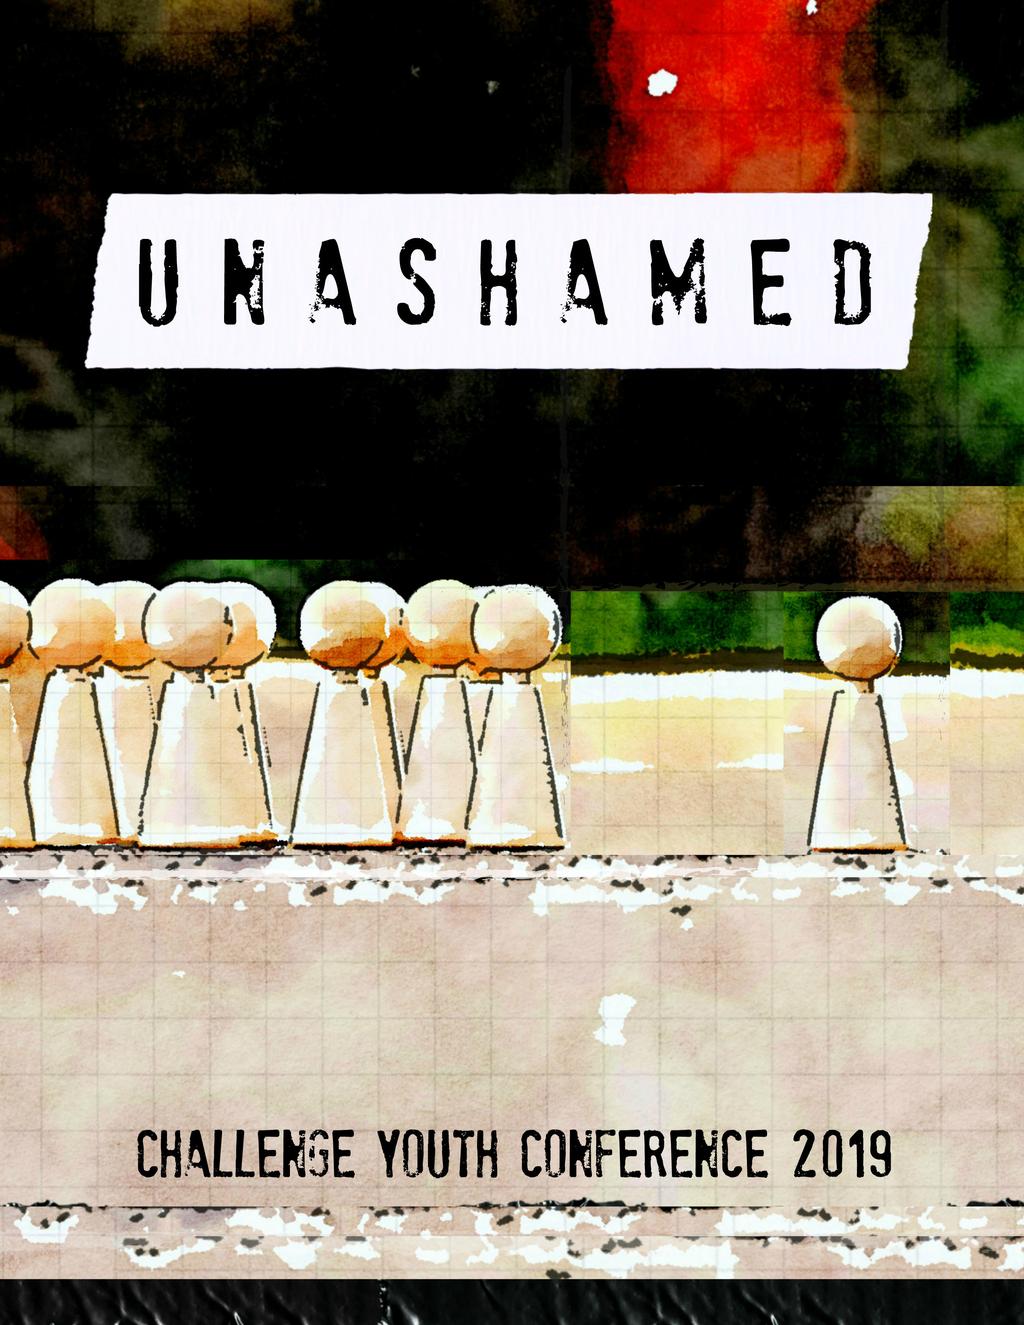 The following Devotional ideas are yours to use before during and after Challenge Youth Conference.